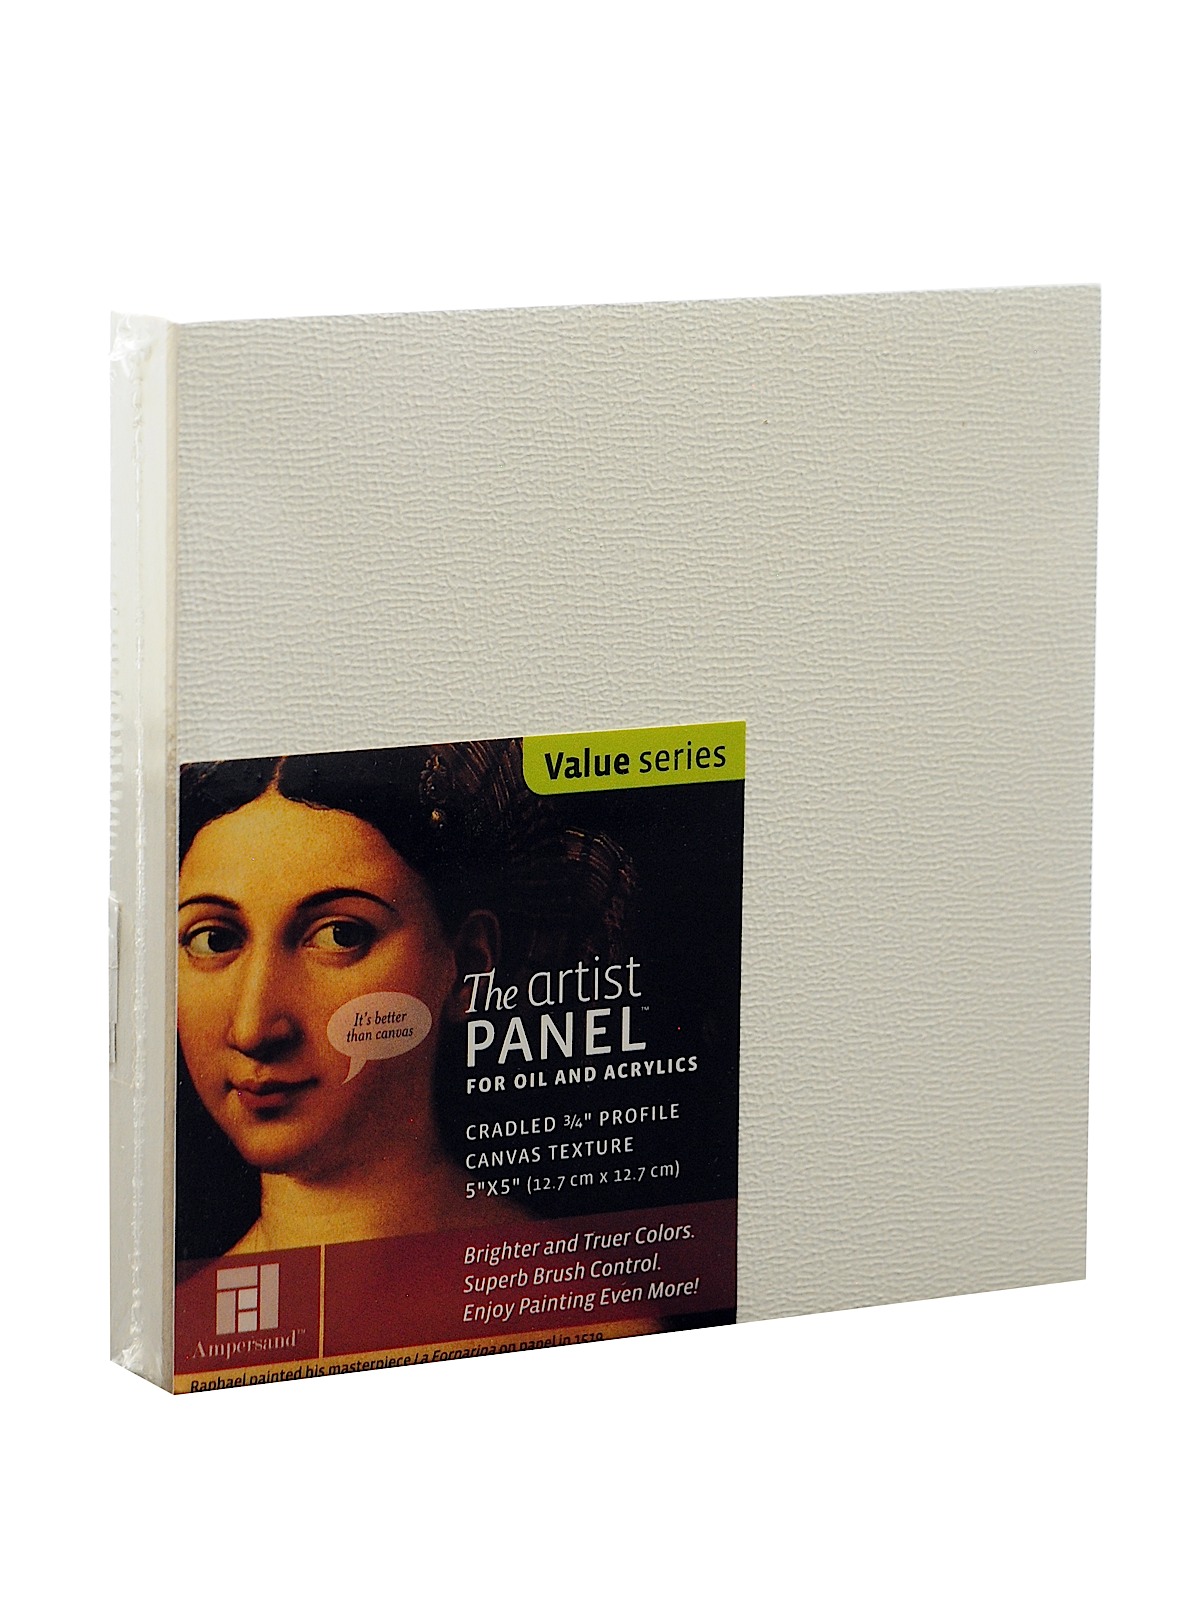 The Artist Panel Canvas Texture Cradled Profile 5 In. X 5 In. 3 4 In.